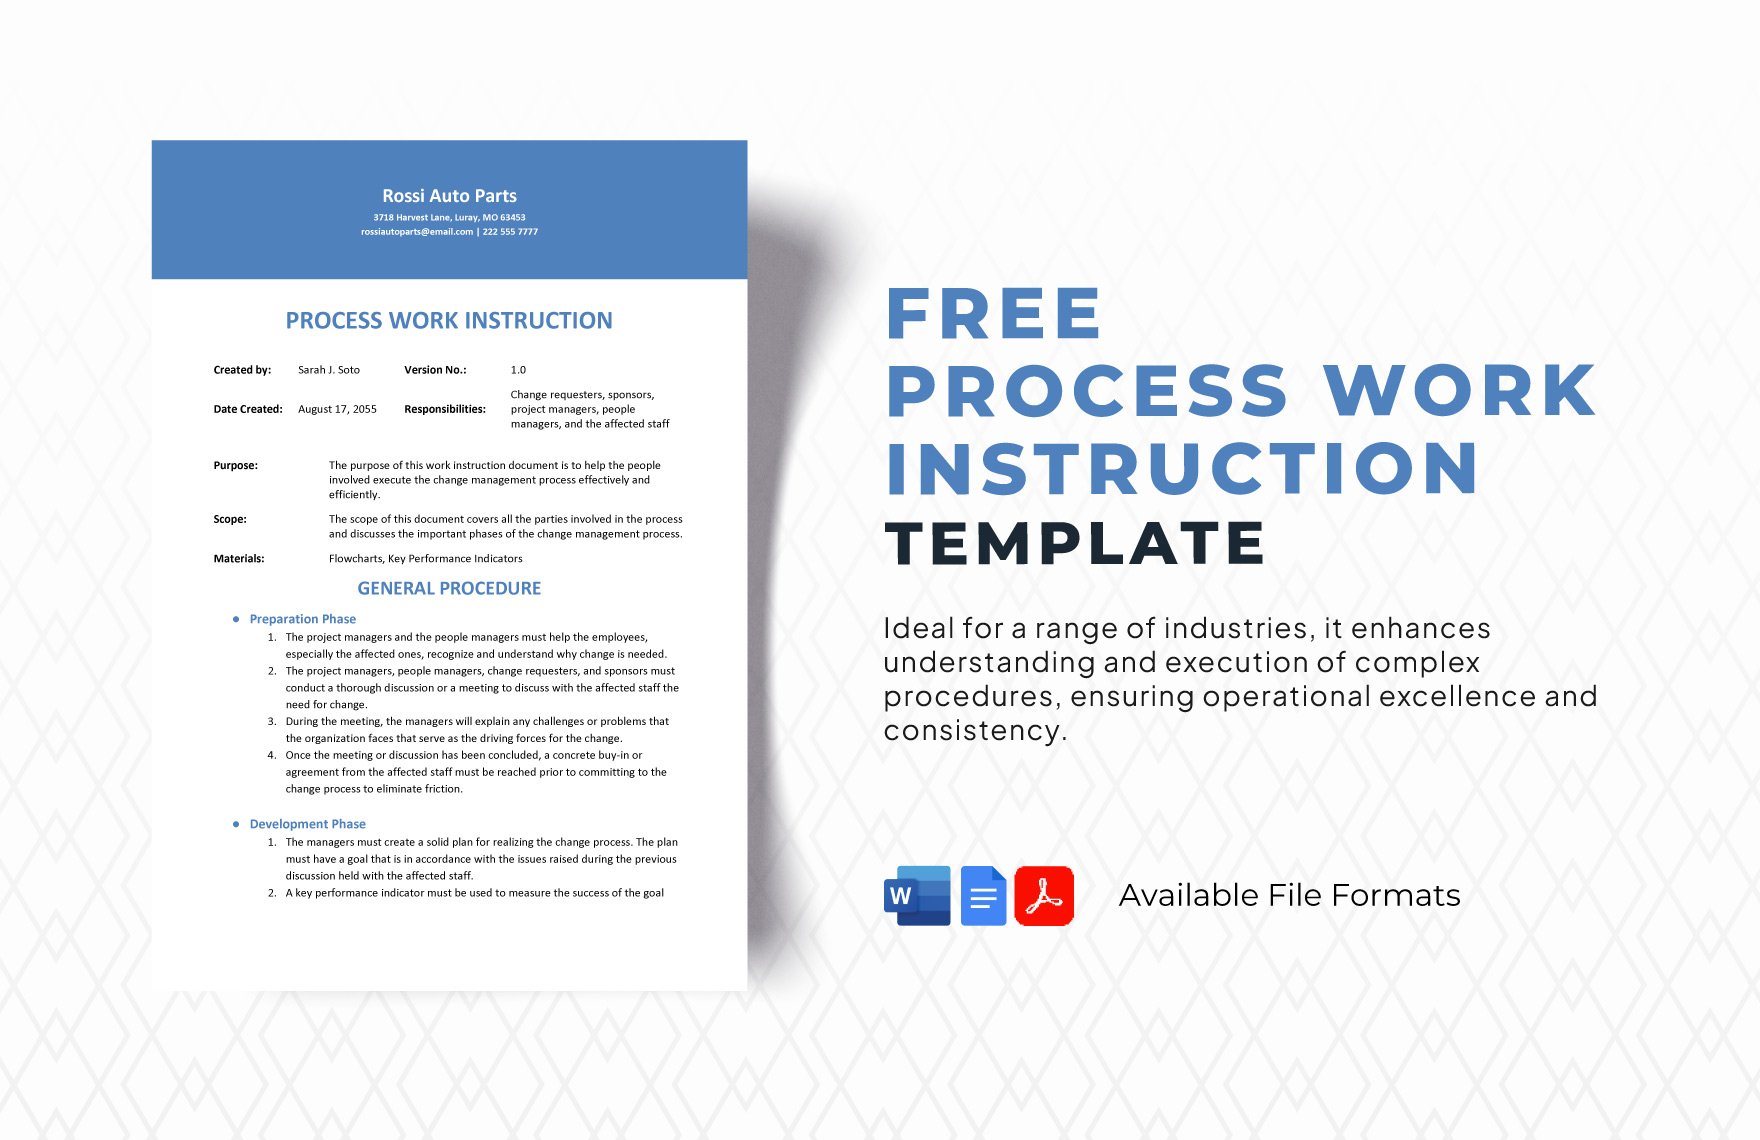 Free Process Work Instruction Template in Word, Google Docs, PDF